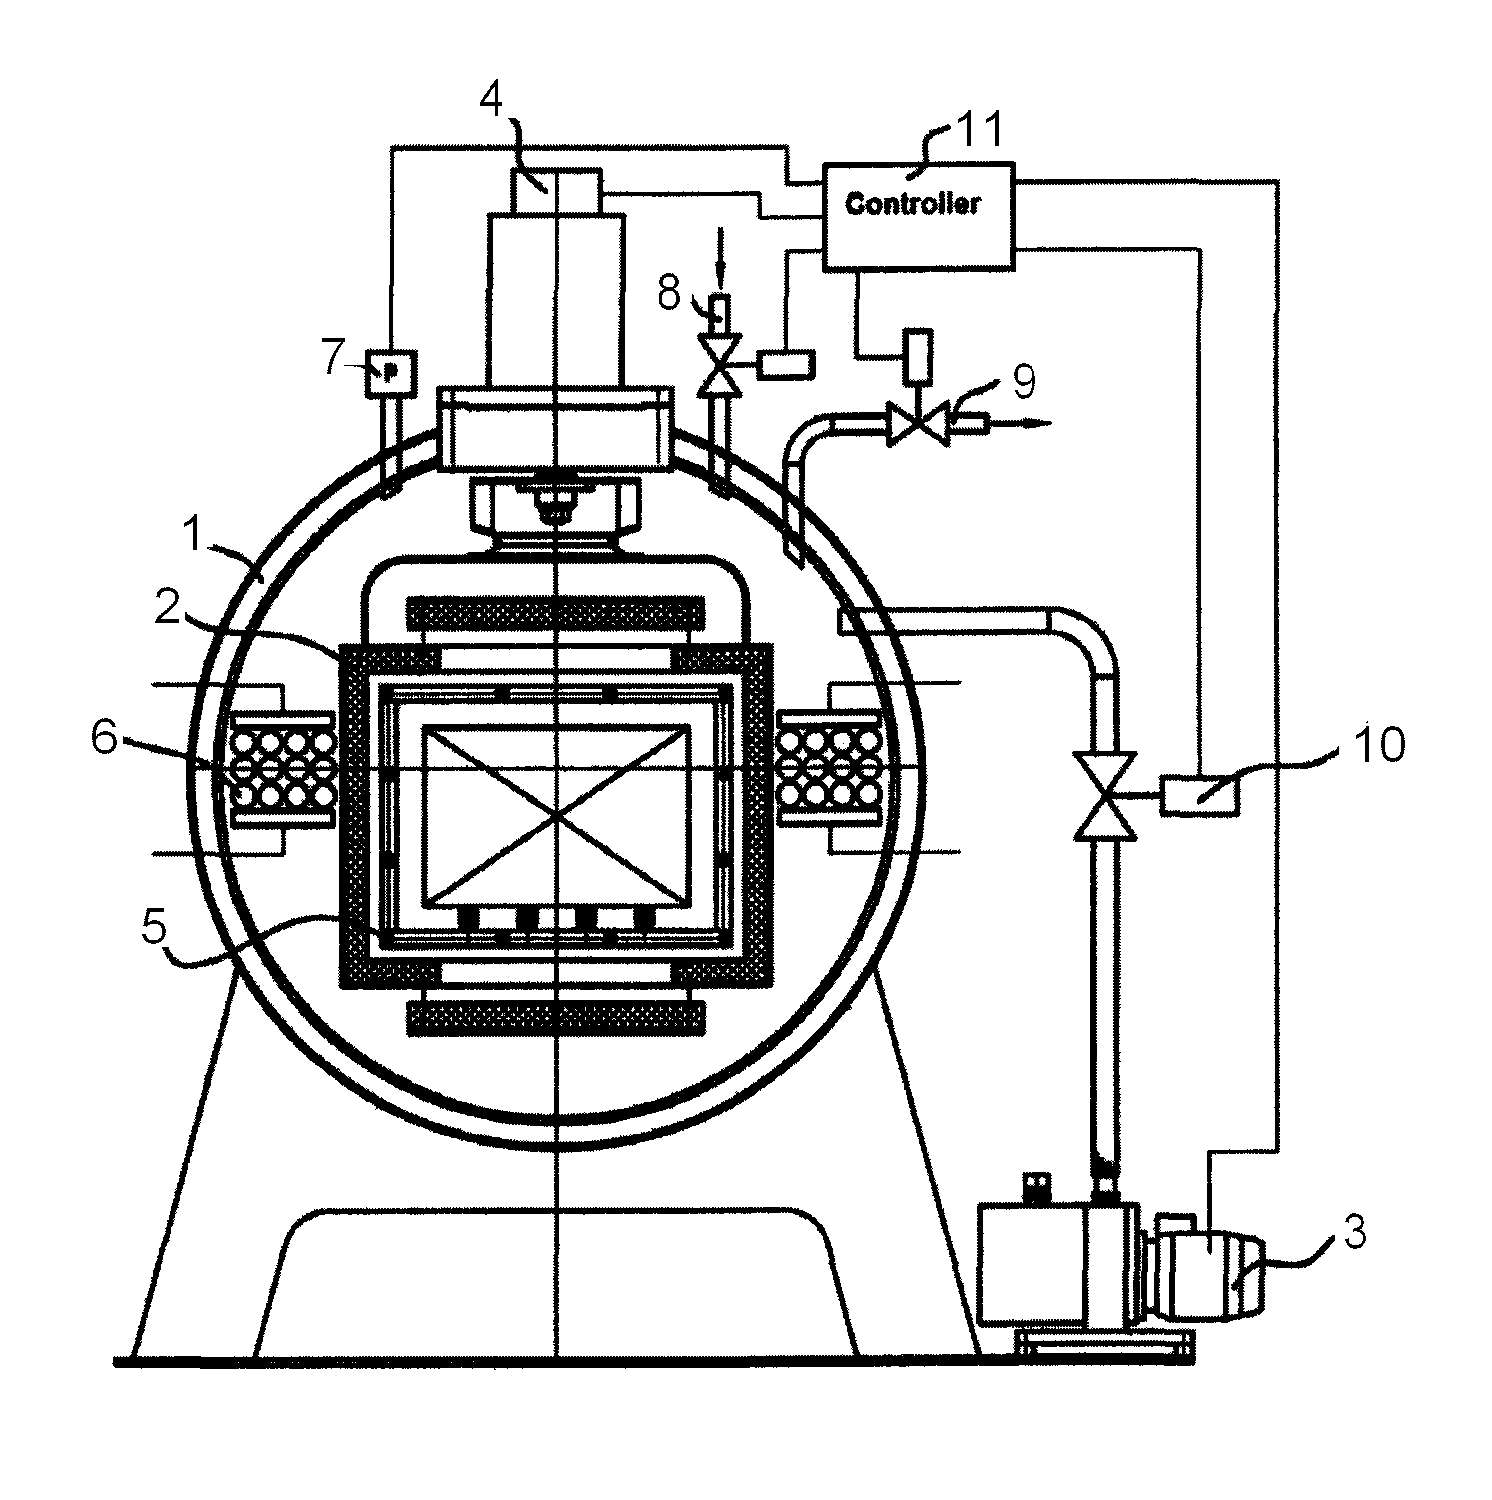 Method for controlling vacuum pumps in an industrial furnace complex